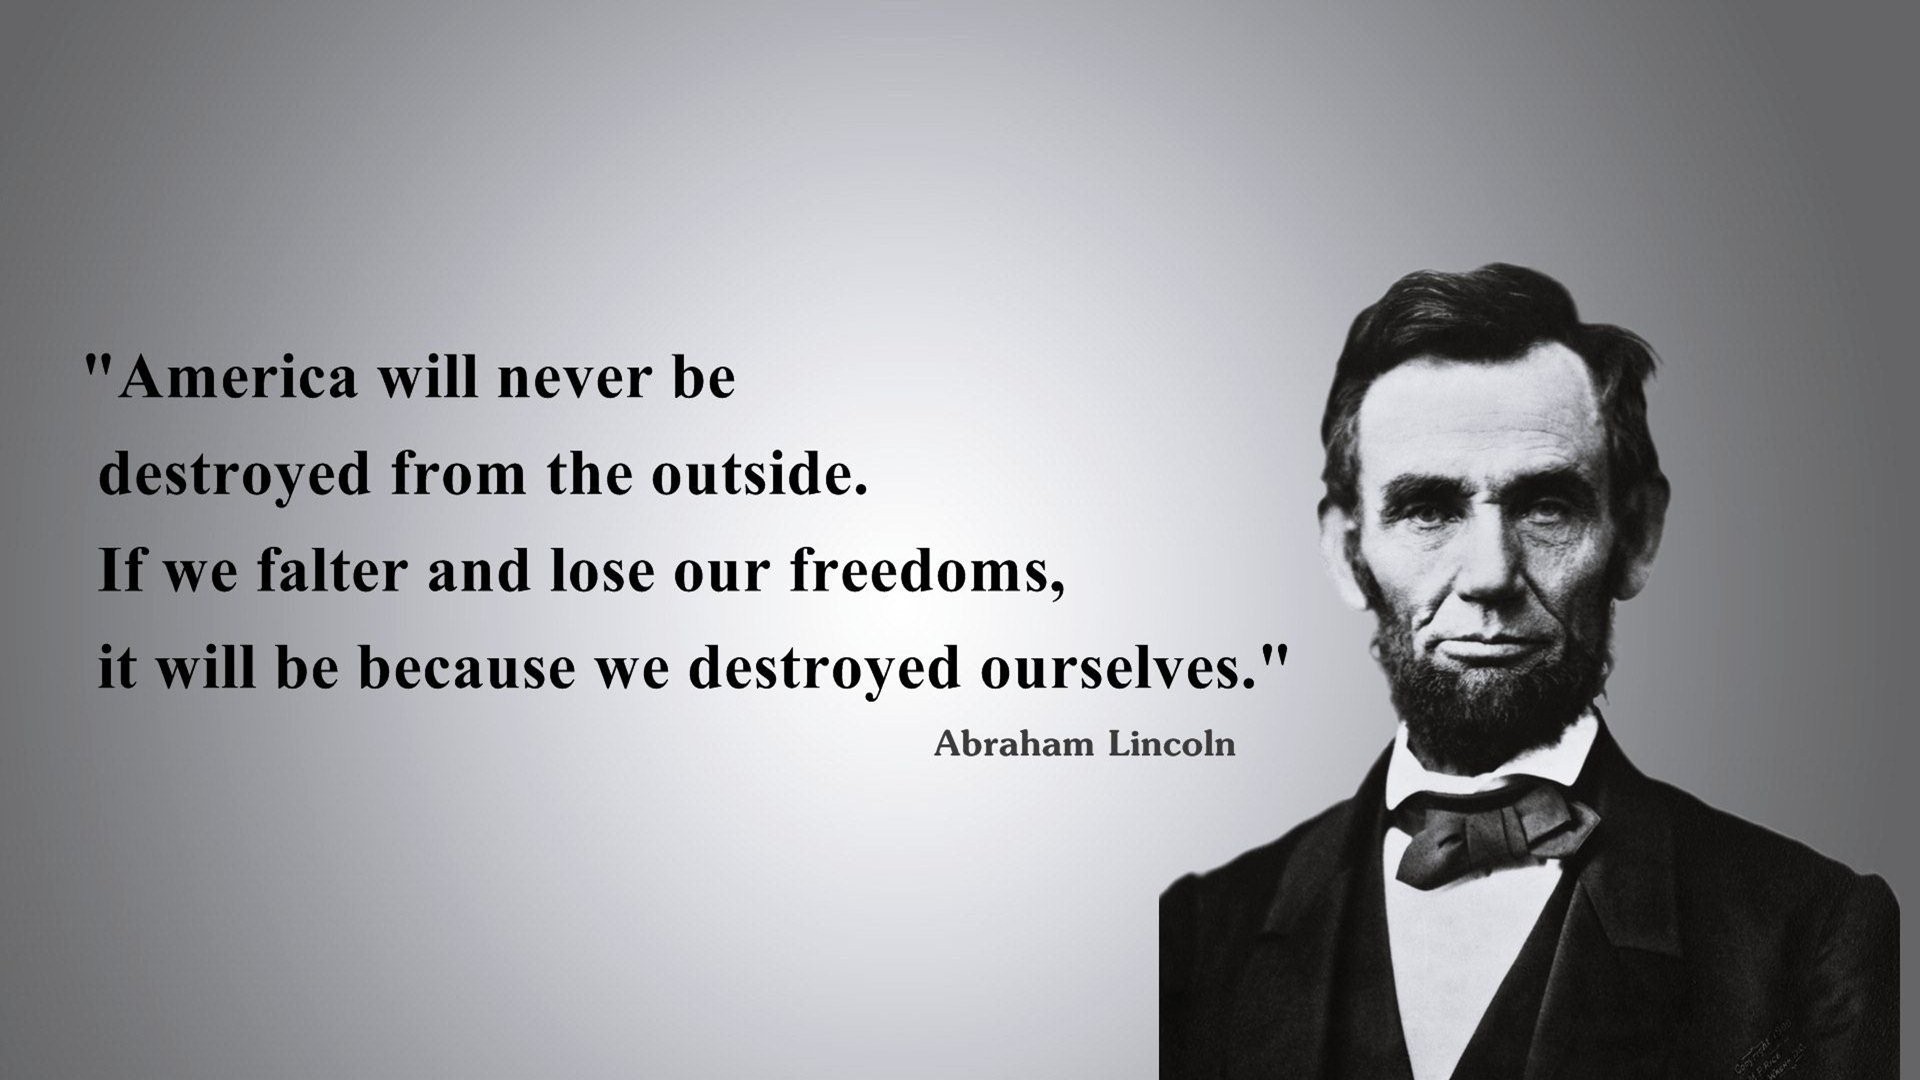 Abraham Lincoln Freedom Quotes Wallpaper 